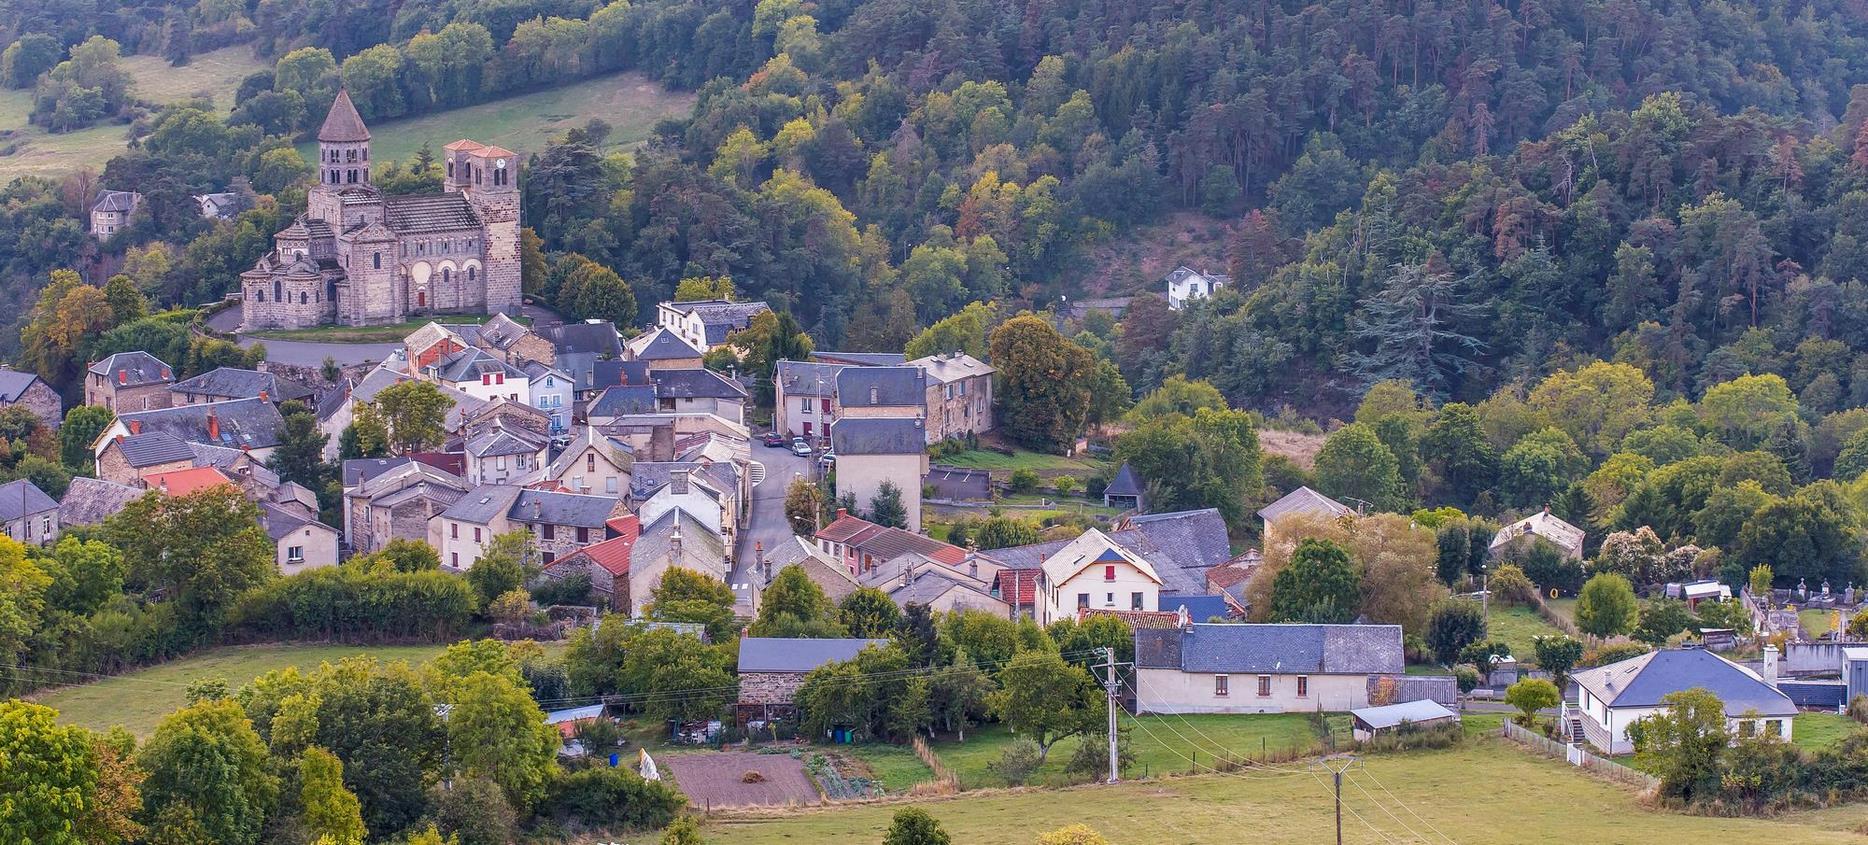 Saint Nectaire - View of the Village of Saint Nectaire in Auvergne